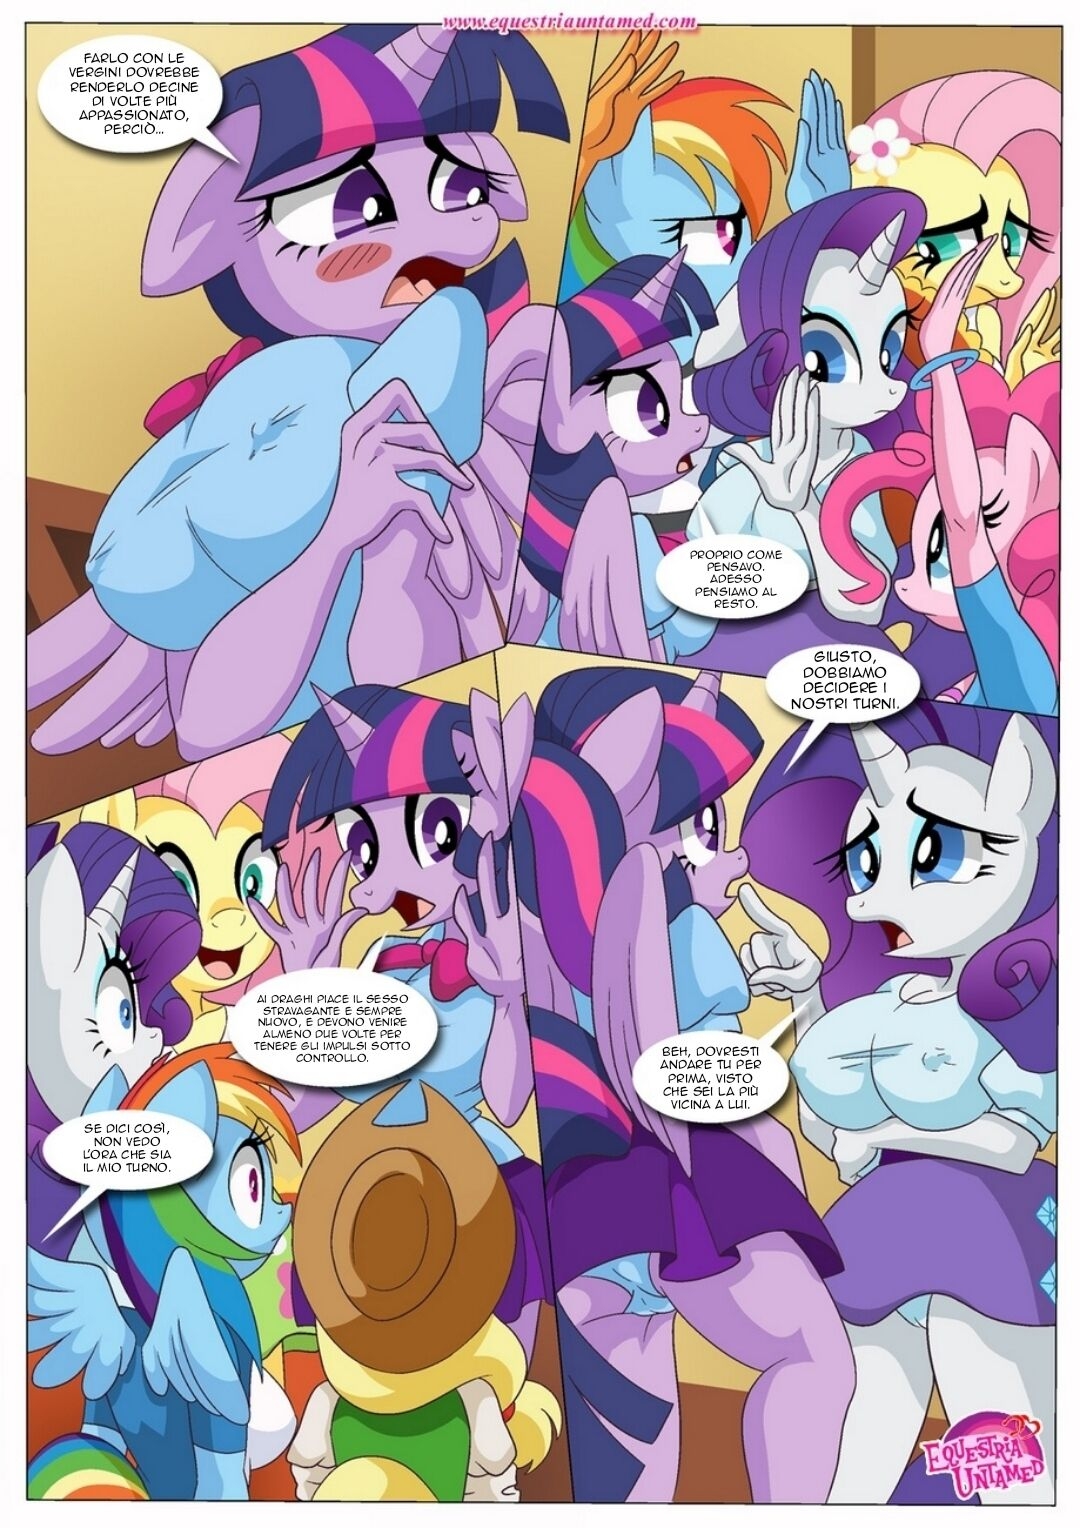 [Palcomix] The Power Of Dragon Mating (My Little Pony Friendship Is Magic) (italian) 20